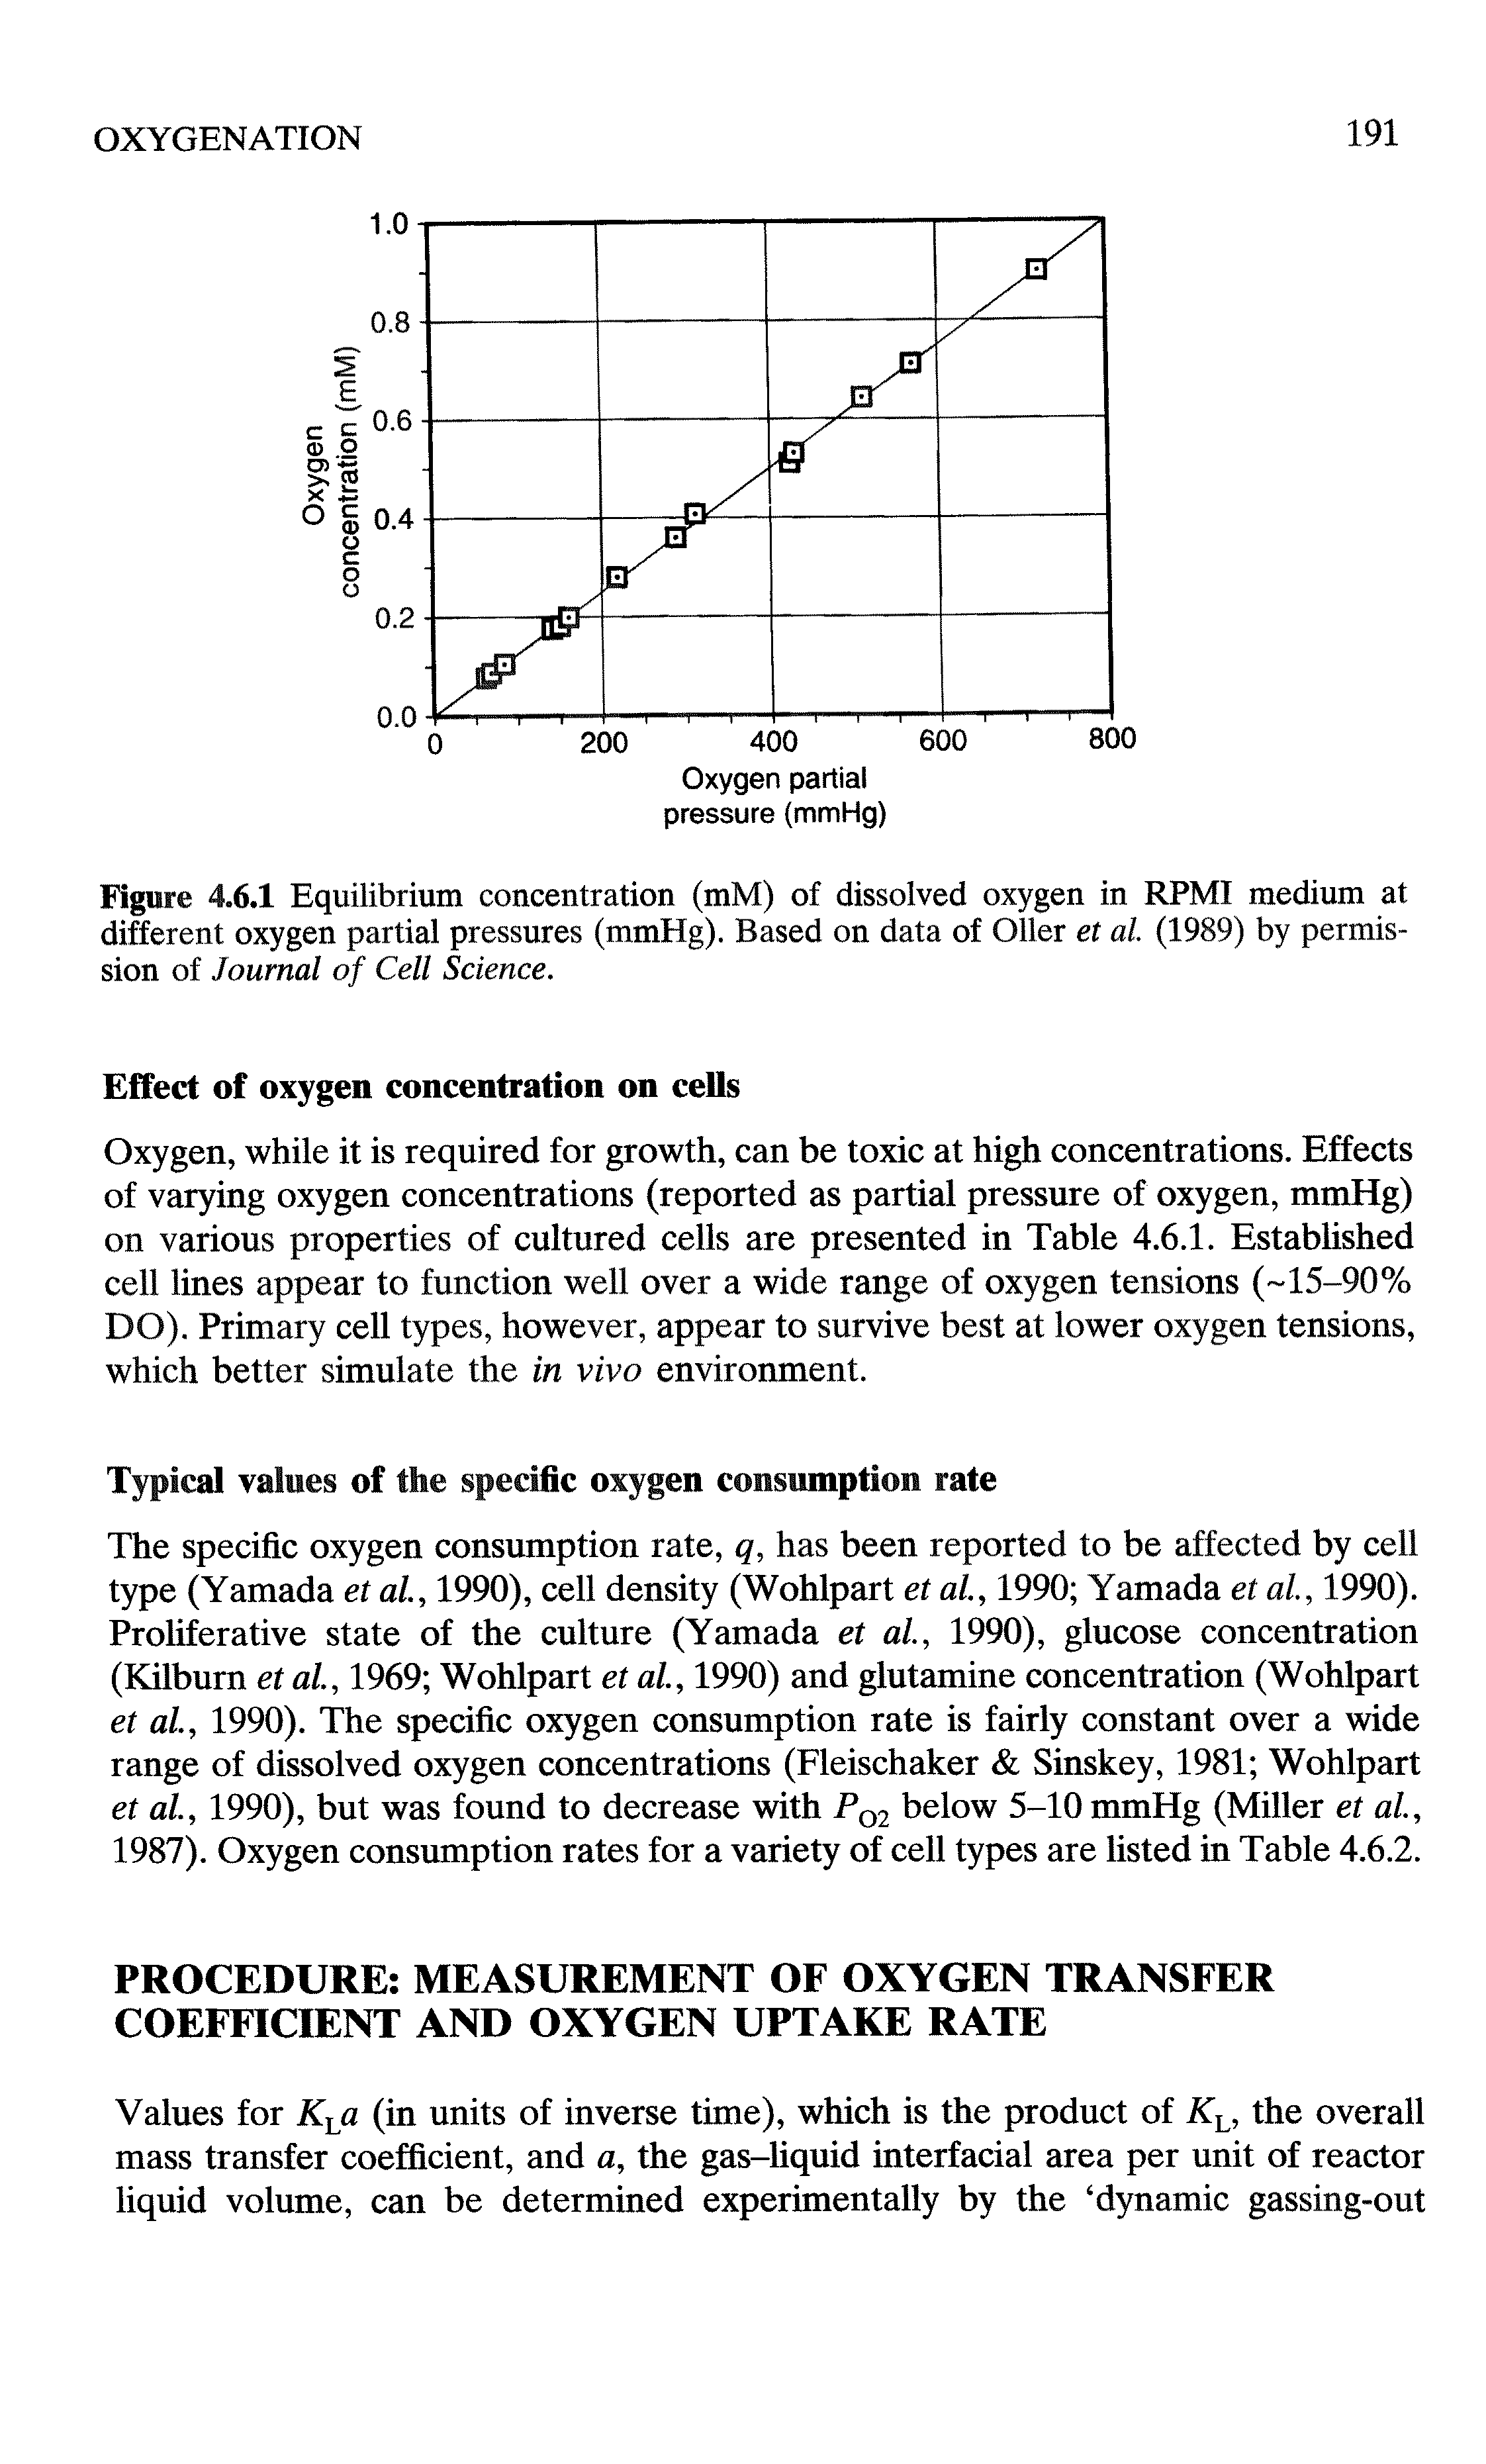 Figure 4.6.1 Equilibrium concentration (mM) of dissolved oxygen in RPMI medium at different oxygen partial pressures (mmHg). Based on data of Oiler et al. (1989) by permission of Journal of Cell Science.